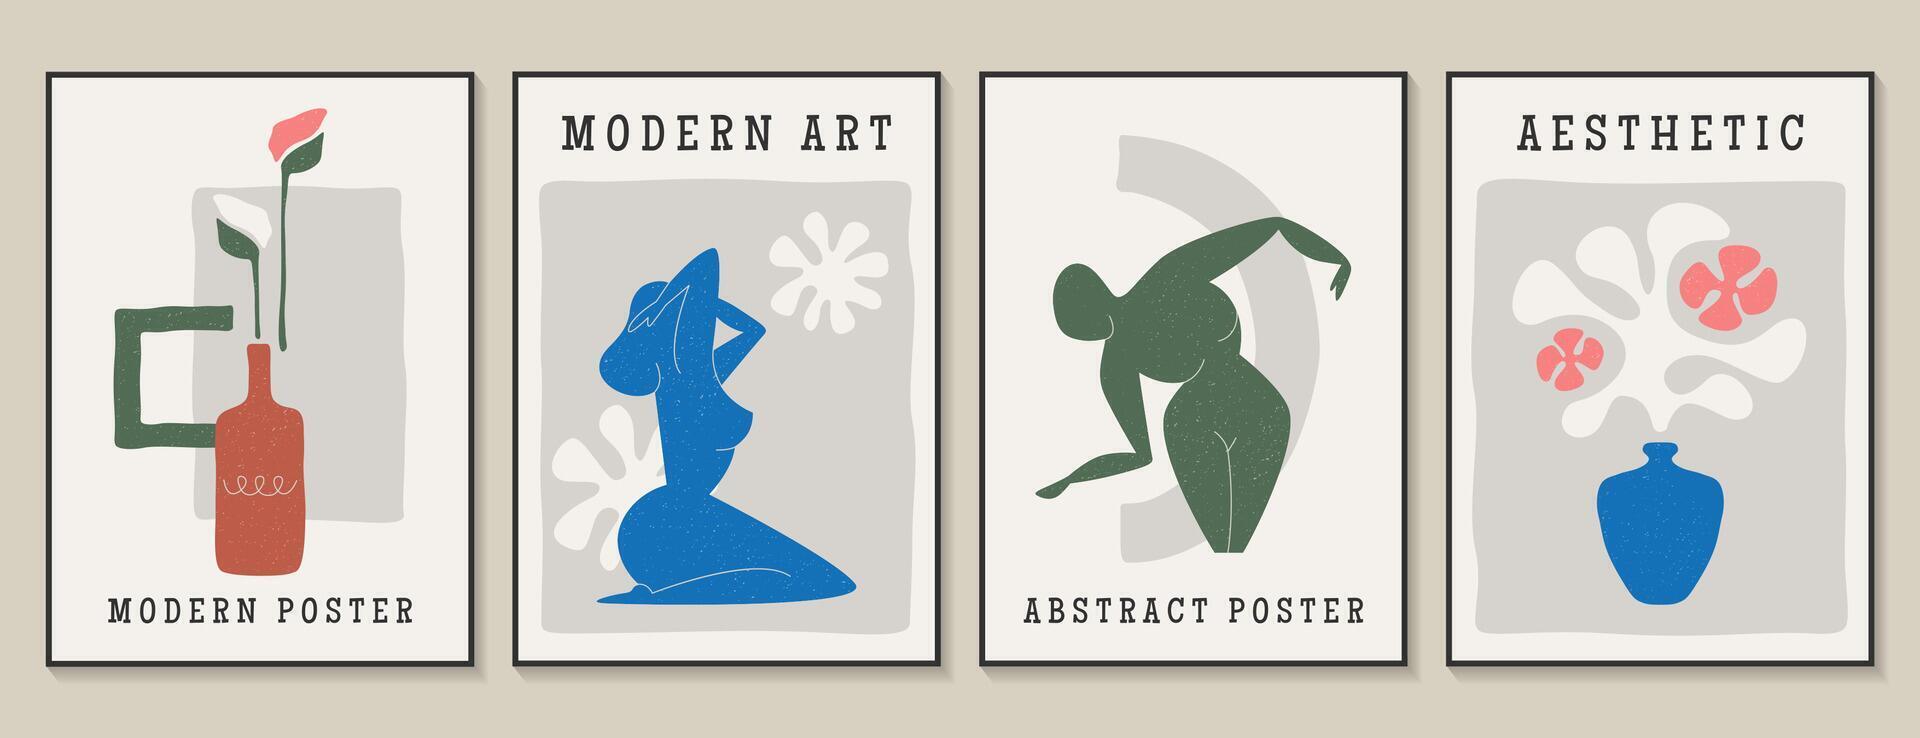 Contemporary matisse posters. Set of modern abstract wall art, aesthetic artworks with women silhouette figures, botanical plants and flowers in vase in minimalist style. Collection for decoration vector